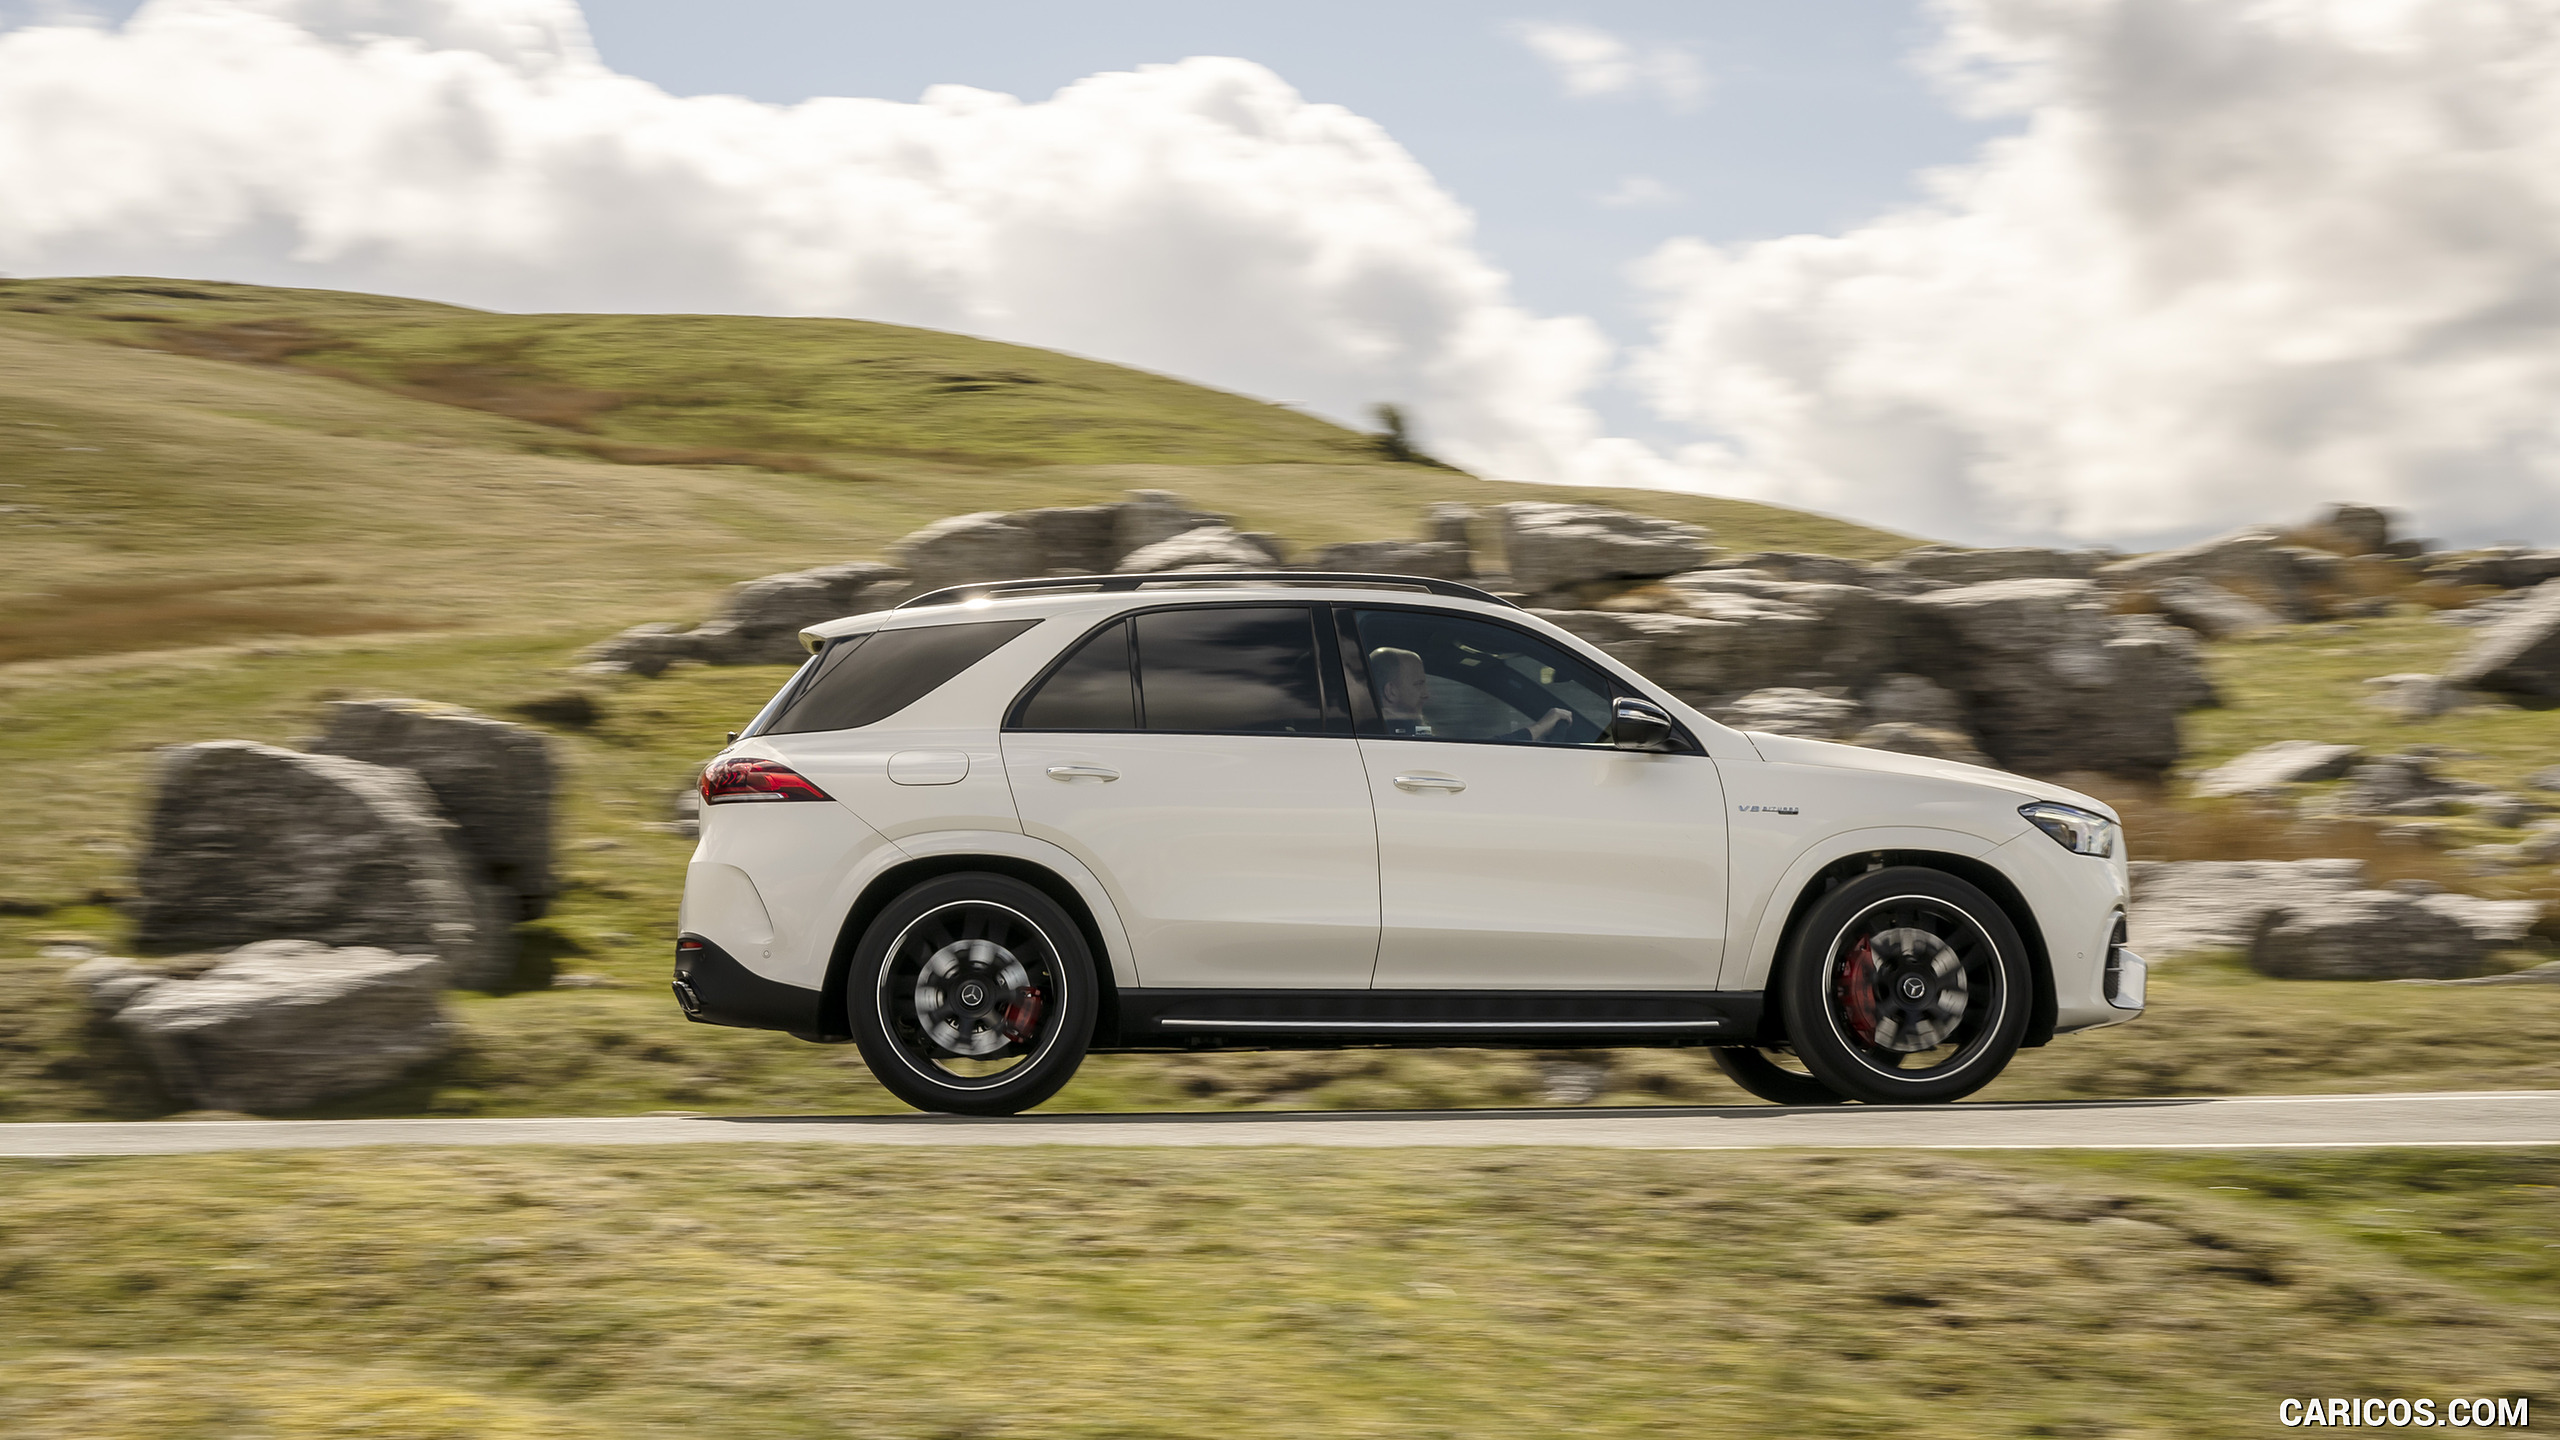 2021 Mercedes-AMG GLE 63 S 4MATIC (UK-Spec) - Side, #108 of 187